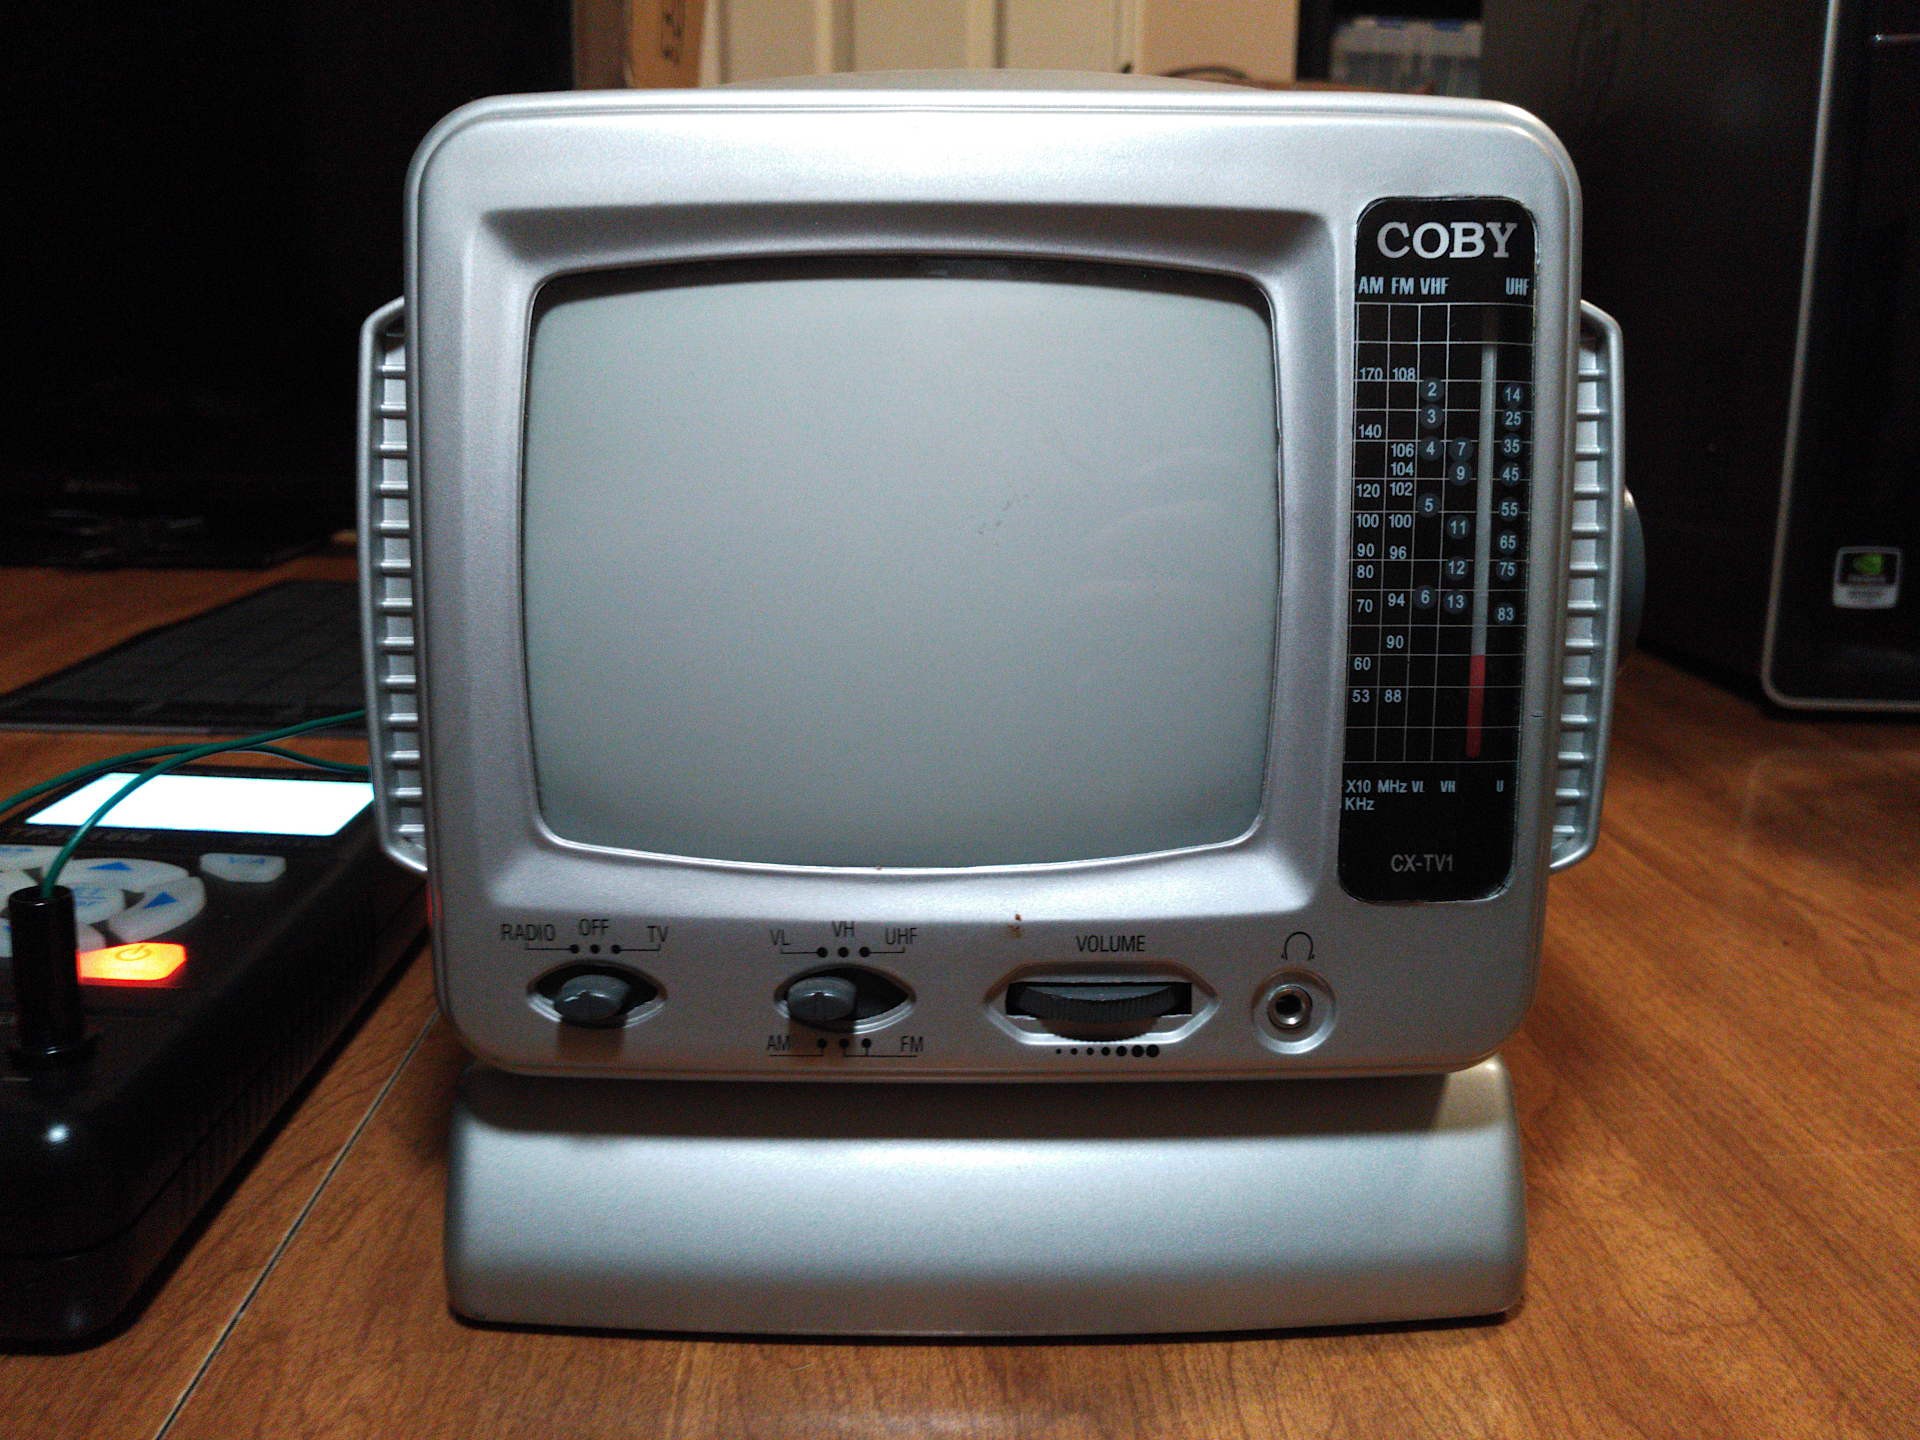 Coby TV front view